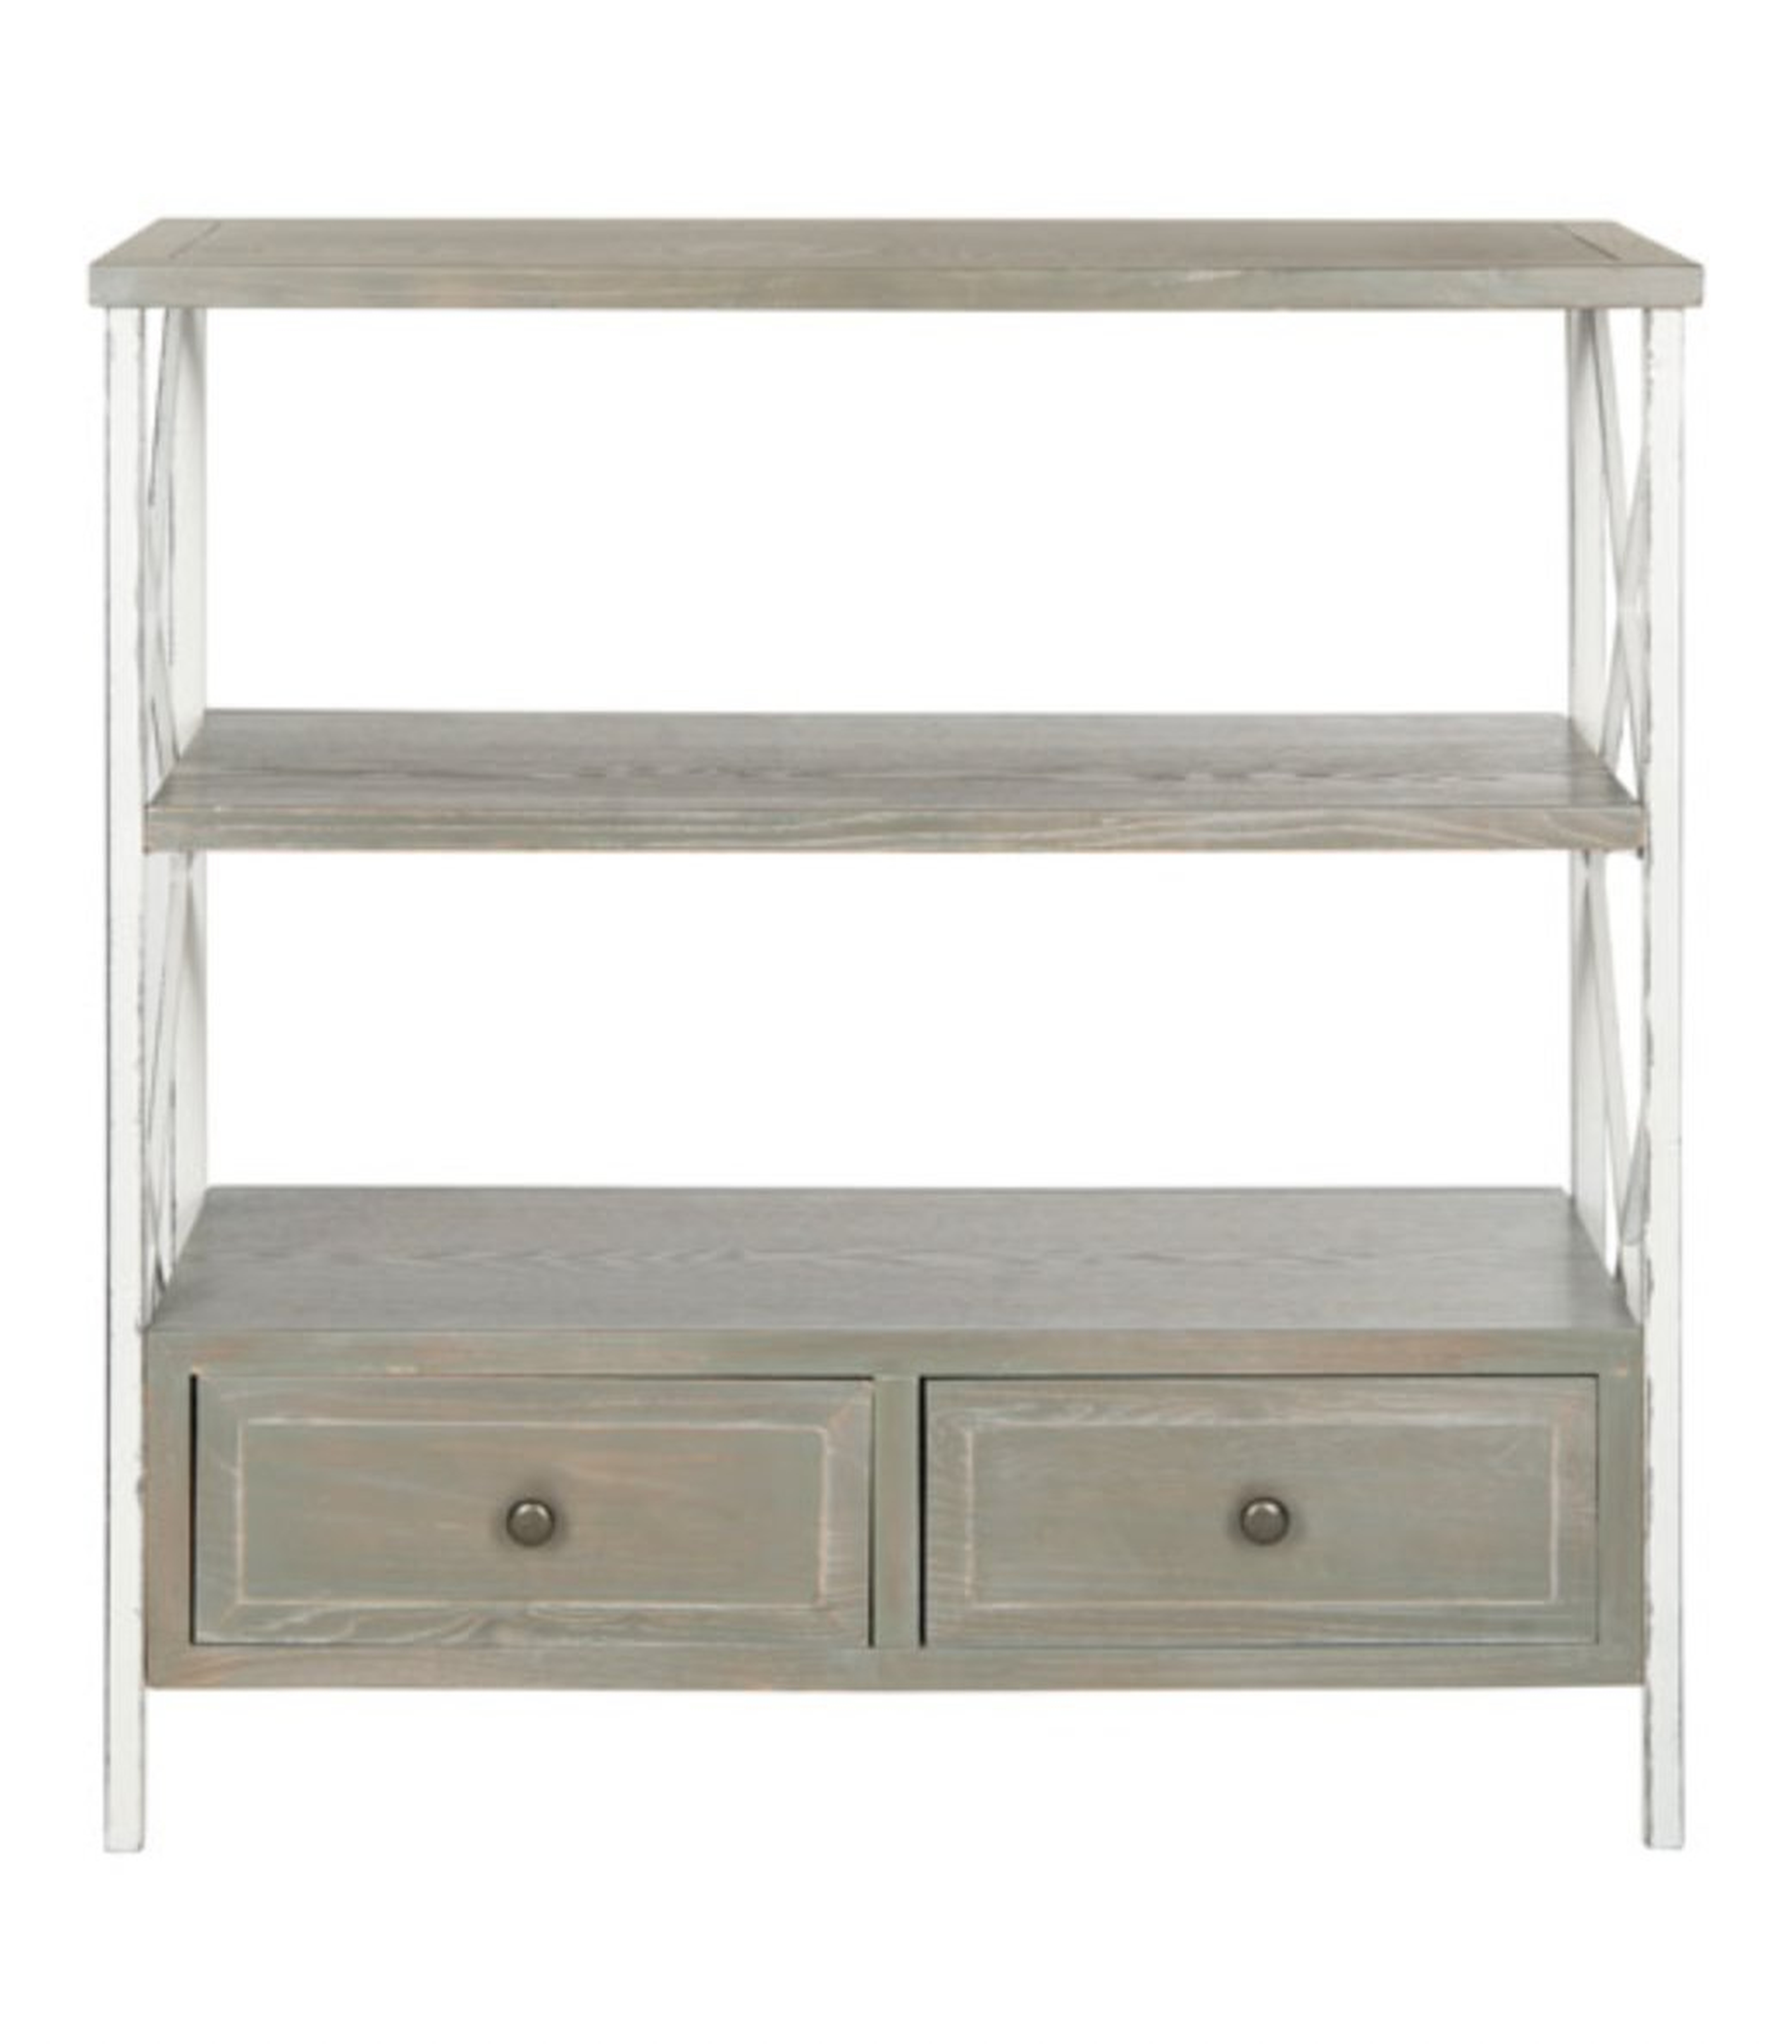 Chandra Console With Storage Drawers - French Grey/White Smoke - Arlo Home - Arlo Home